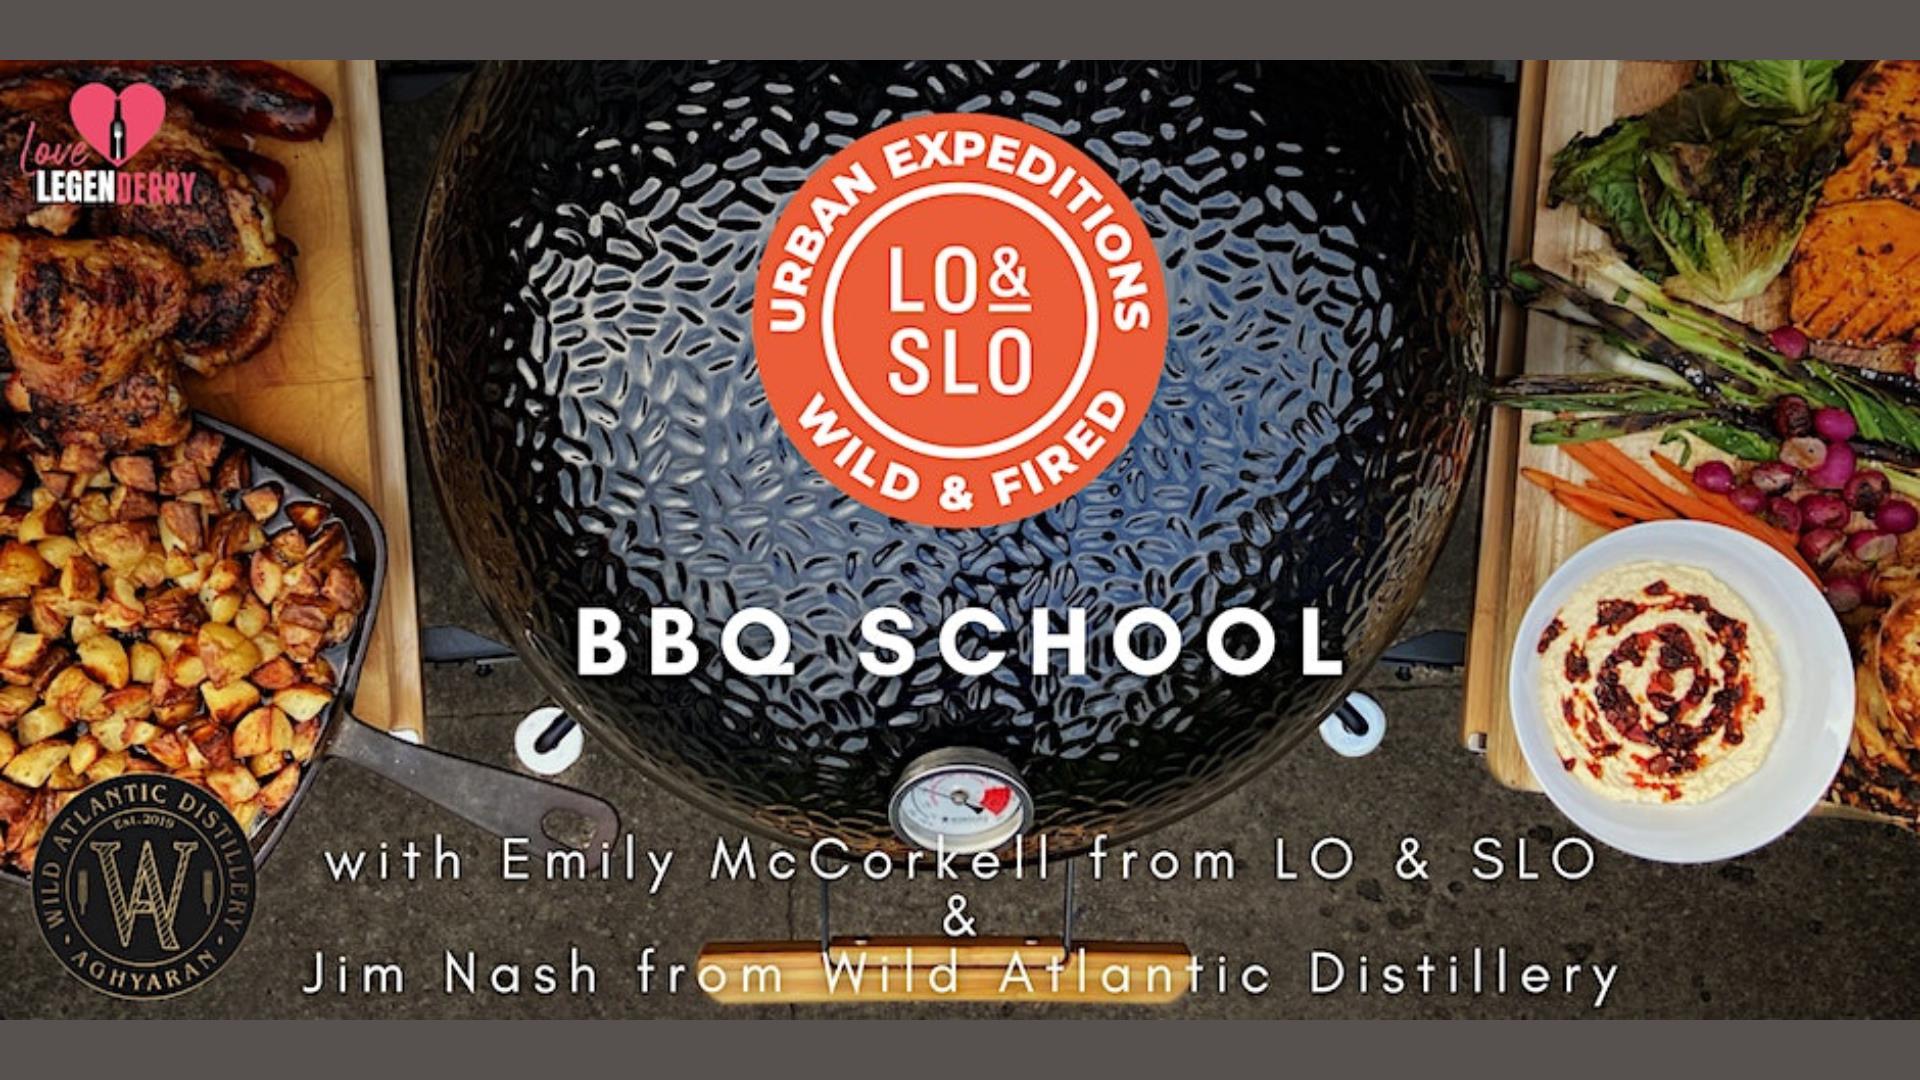 Promotional image for the 'LO & SLO Urban Expeditions: Wild & Fired BBQ School' event.